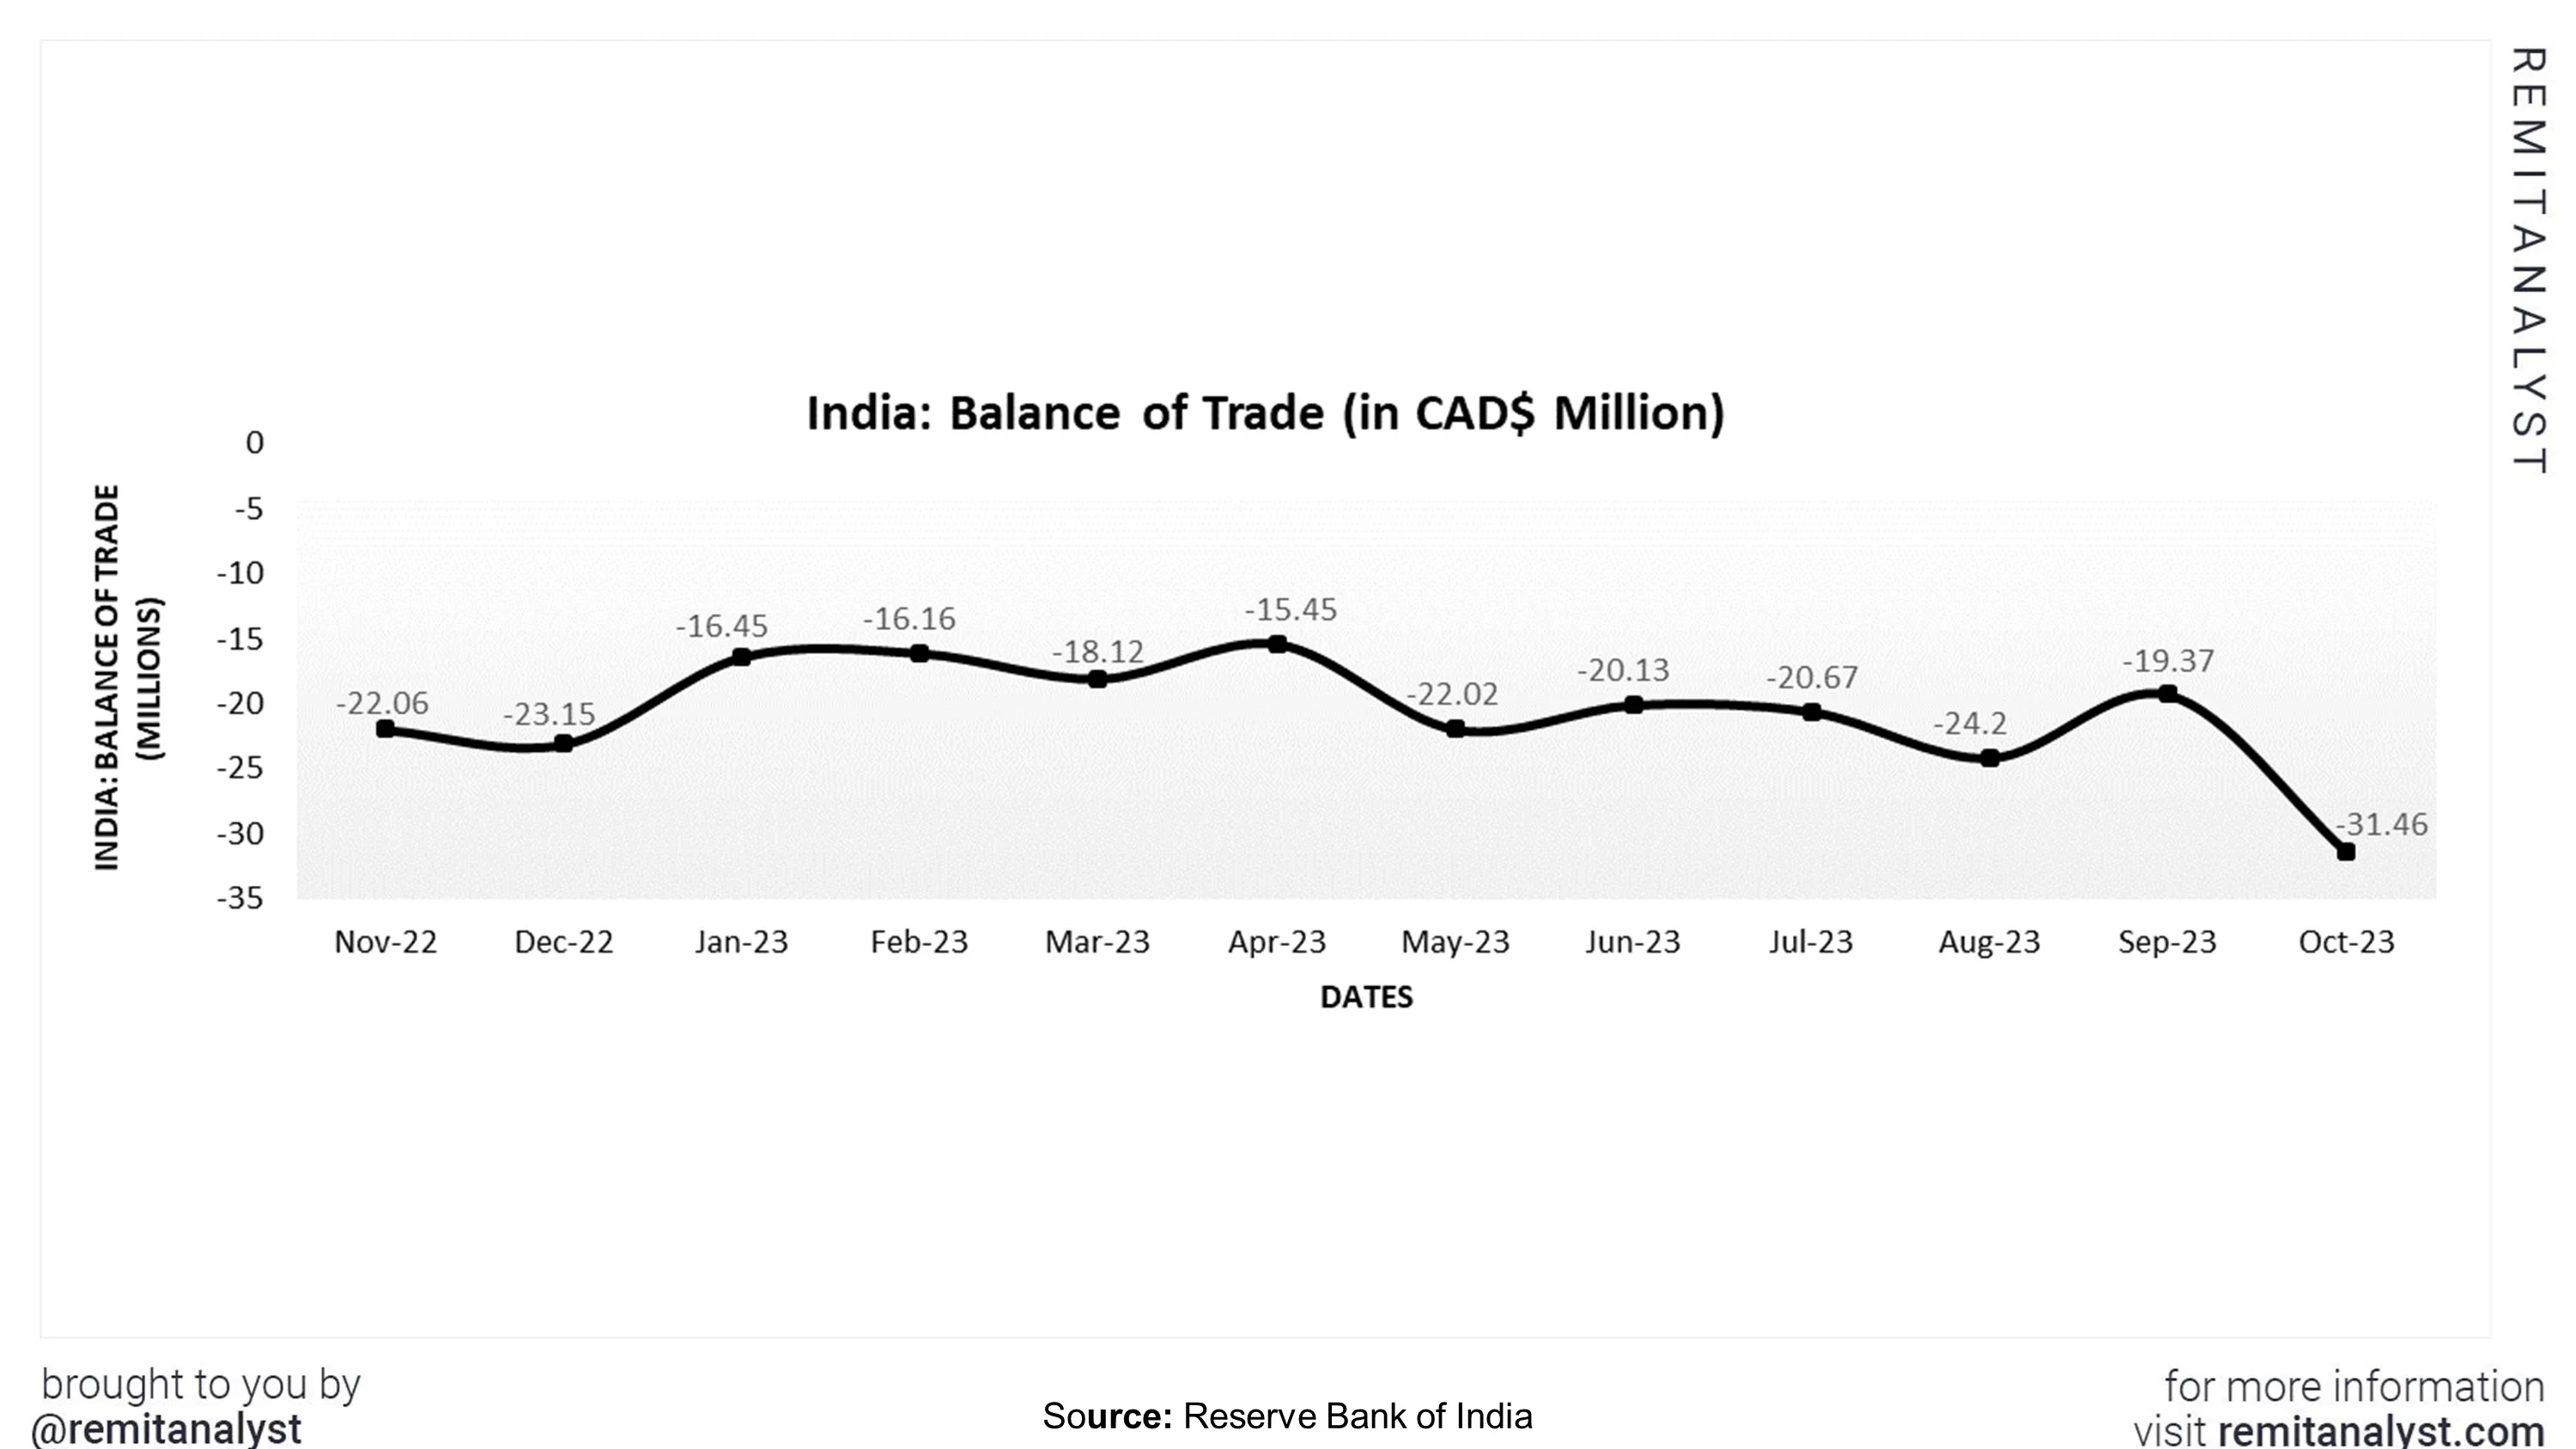 balance-of-trade-india-sep-from-nov-2022-to-oct-2023